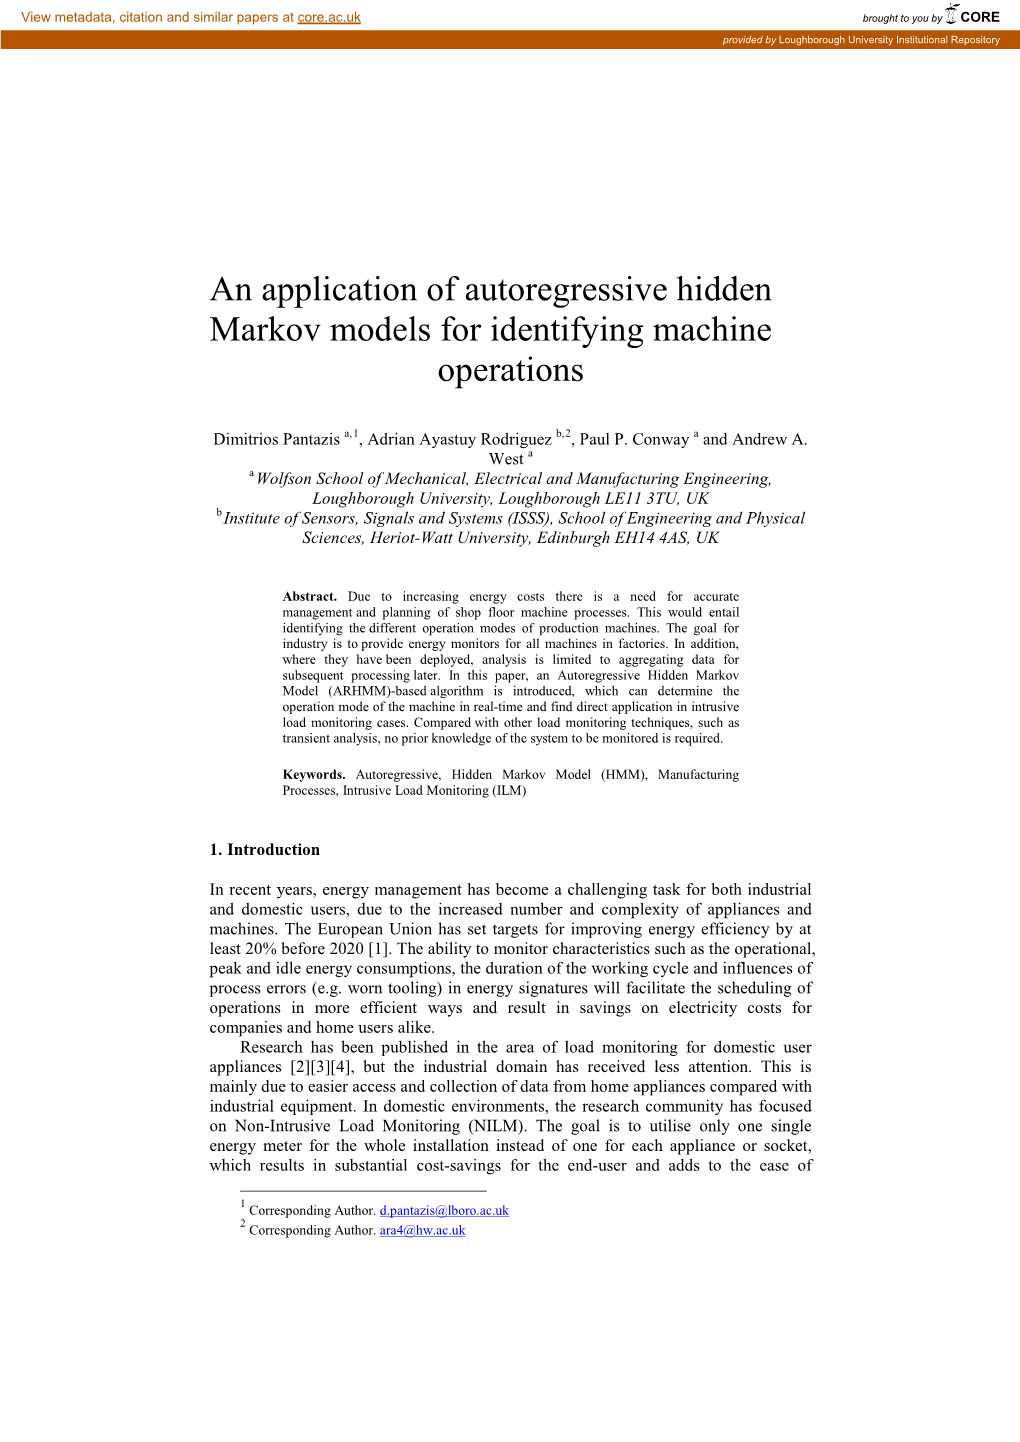 An Application of Autoregressive Hidden Markov Models for Identifying Machine Operations